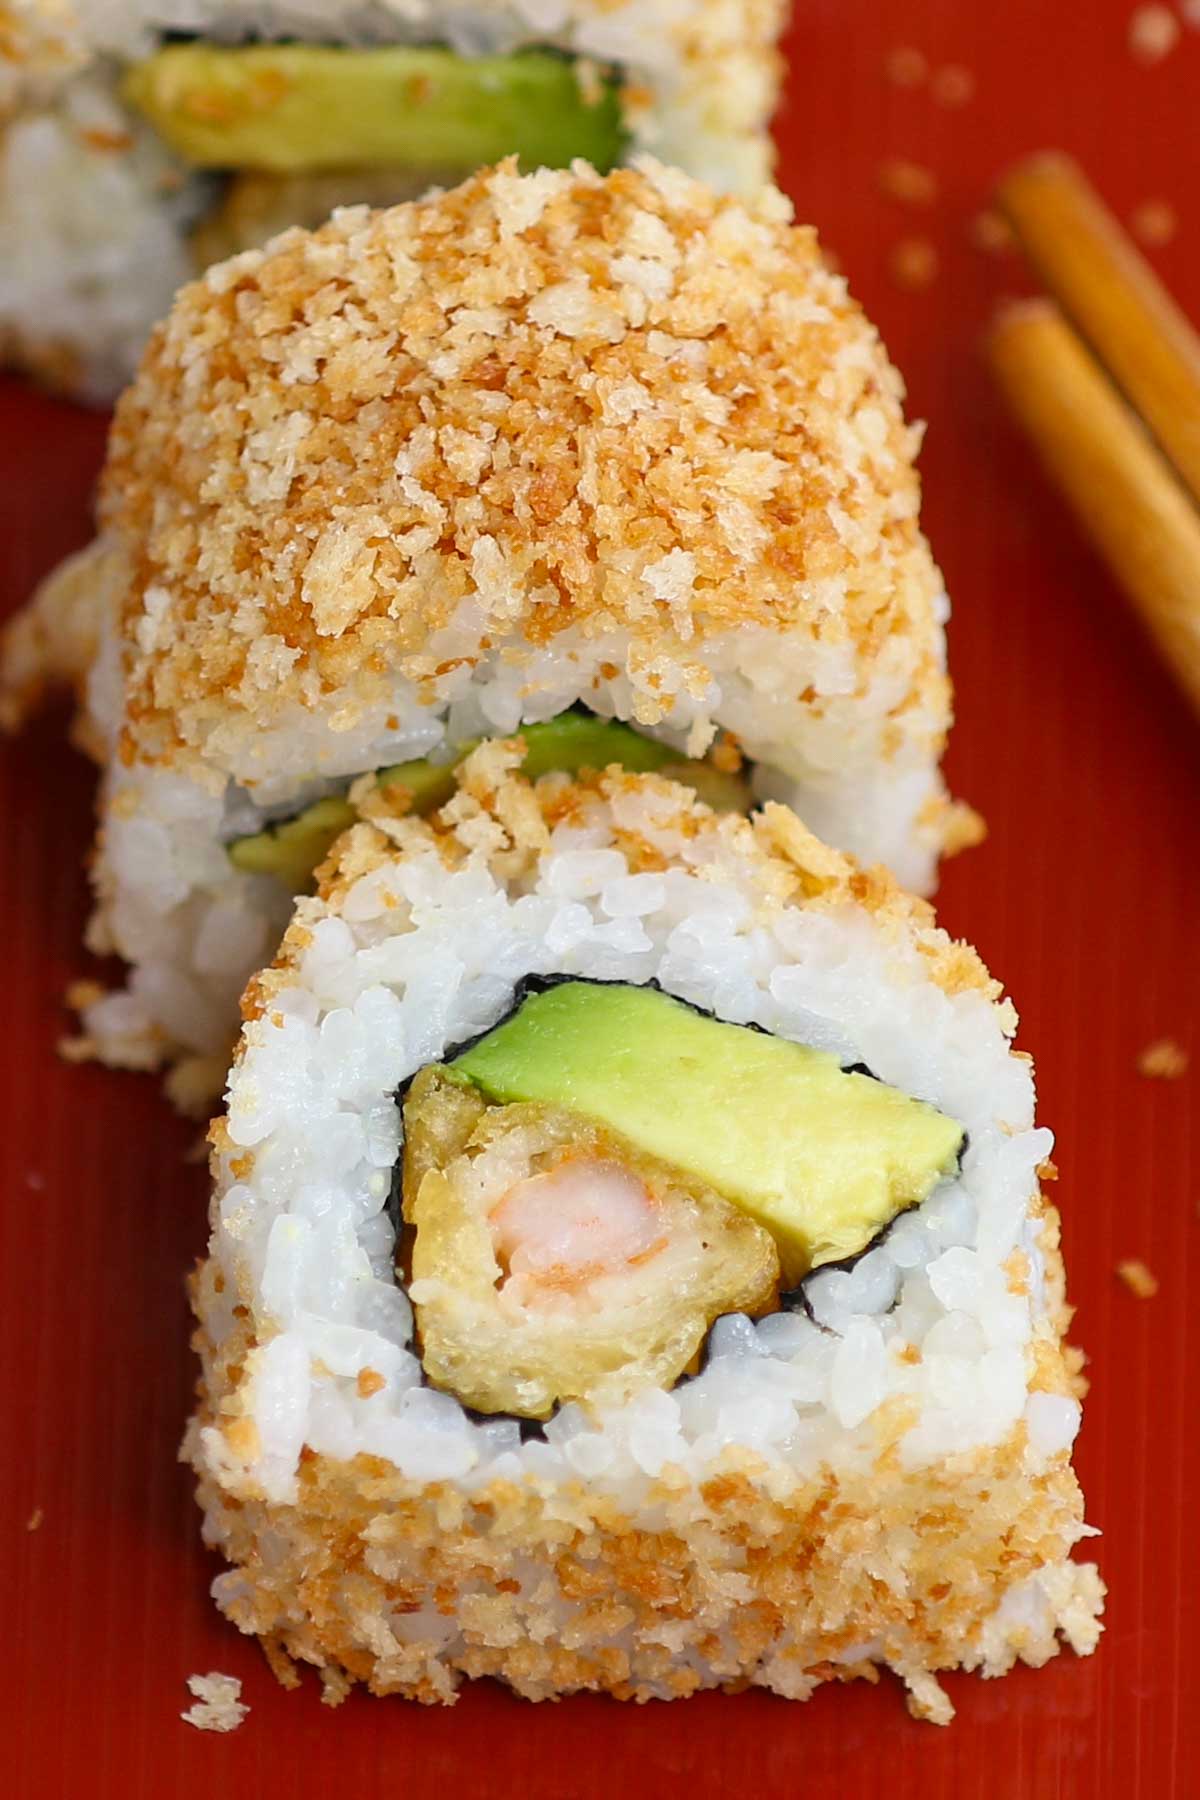 Crunchy Roll Sushi is a delicious variation of the popular California Roll. This crunchy roll features shrimp tempura filling and a crispy topping of toasted panko breadcrumbs. The flavor and texture are out of this world! This recipe is easy to make at home, rivaling the one from your favorite Japanese restaurant.